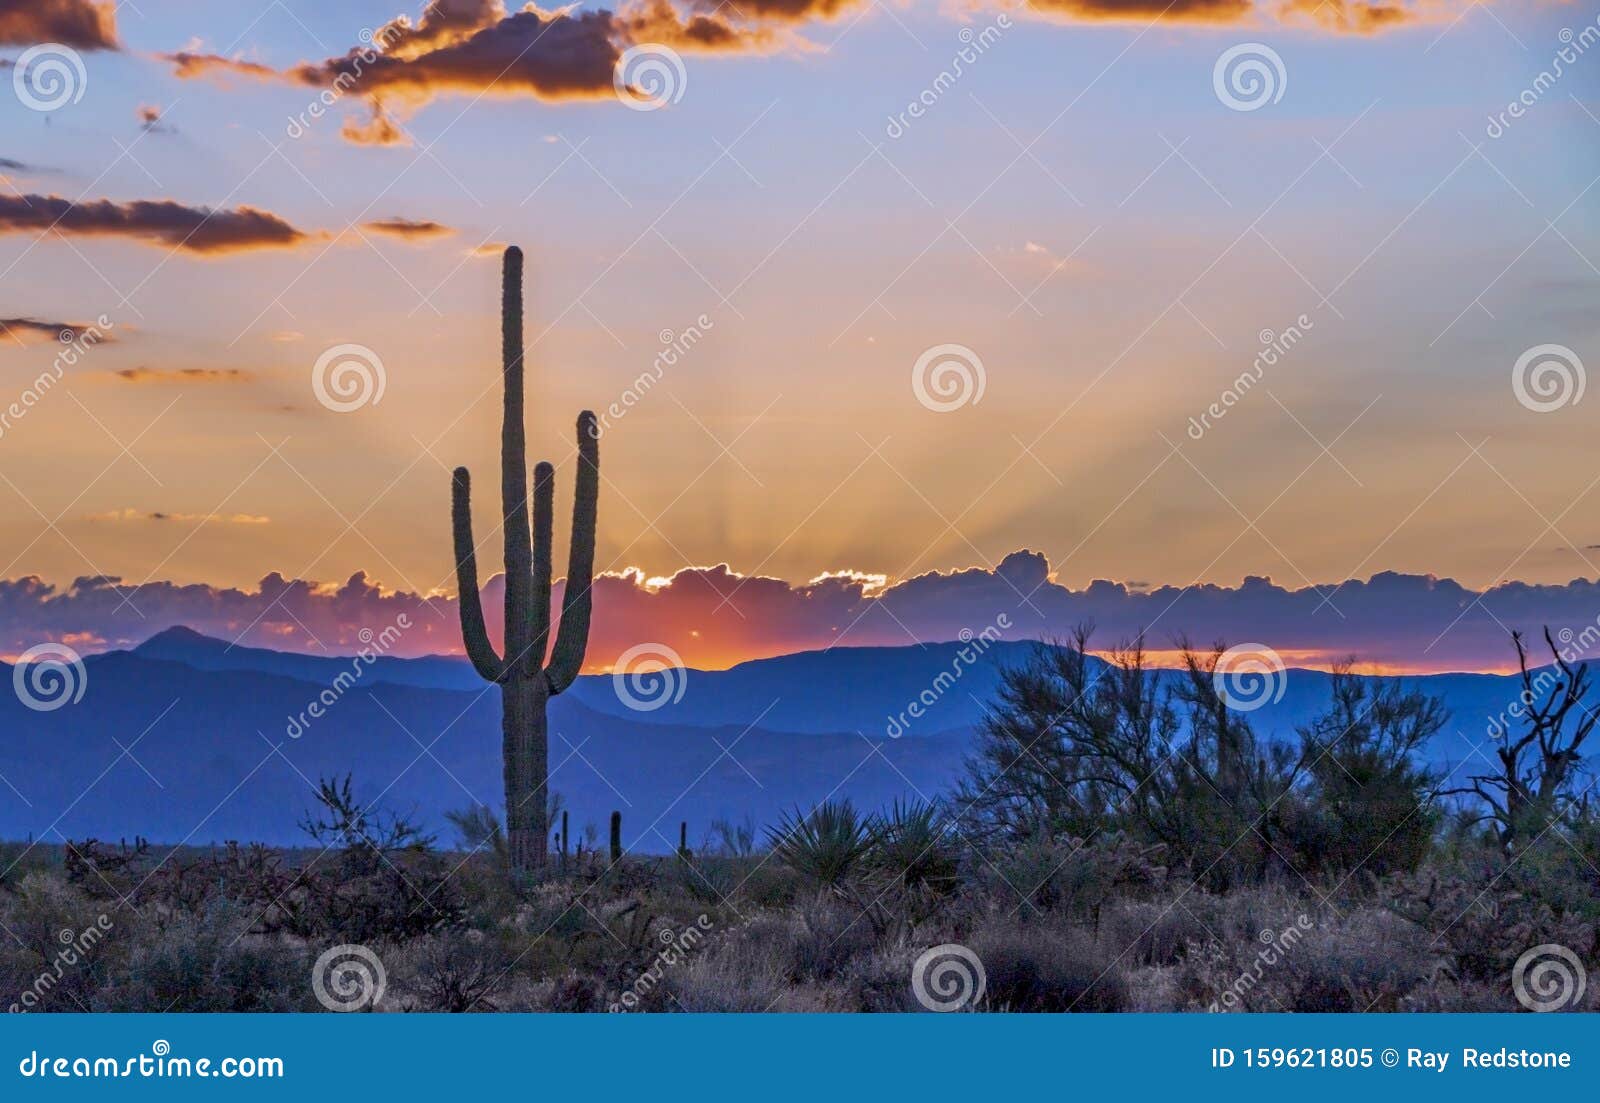 Desert Sunrise with Cactus in Foreground Stock Image - Image of ...